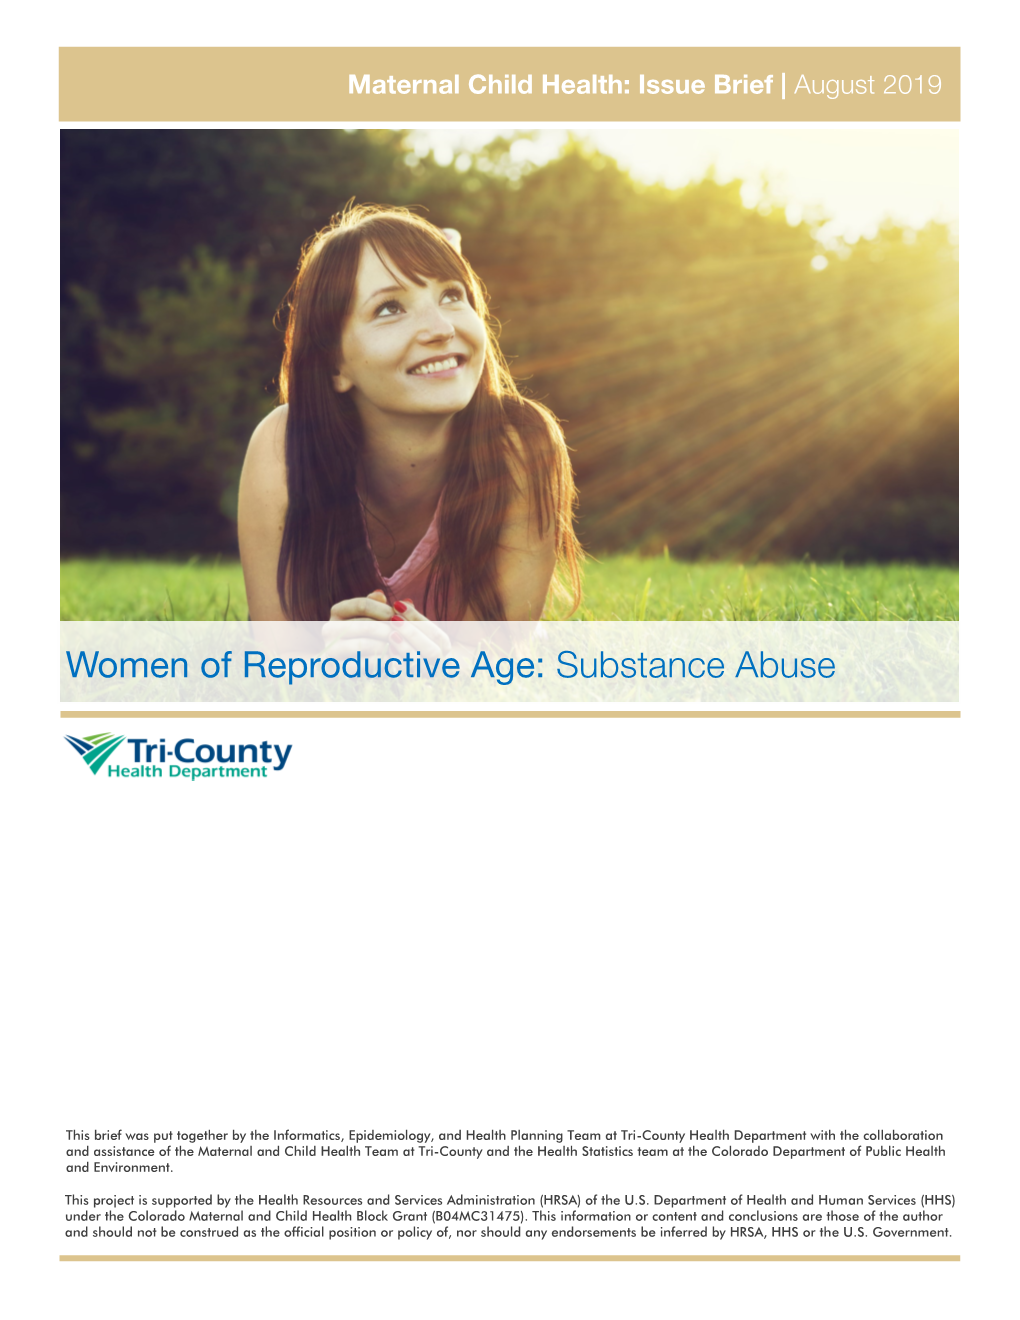 Women of Reproductive Age: Substance Abuse